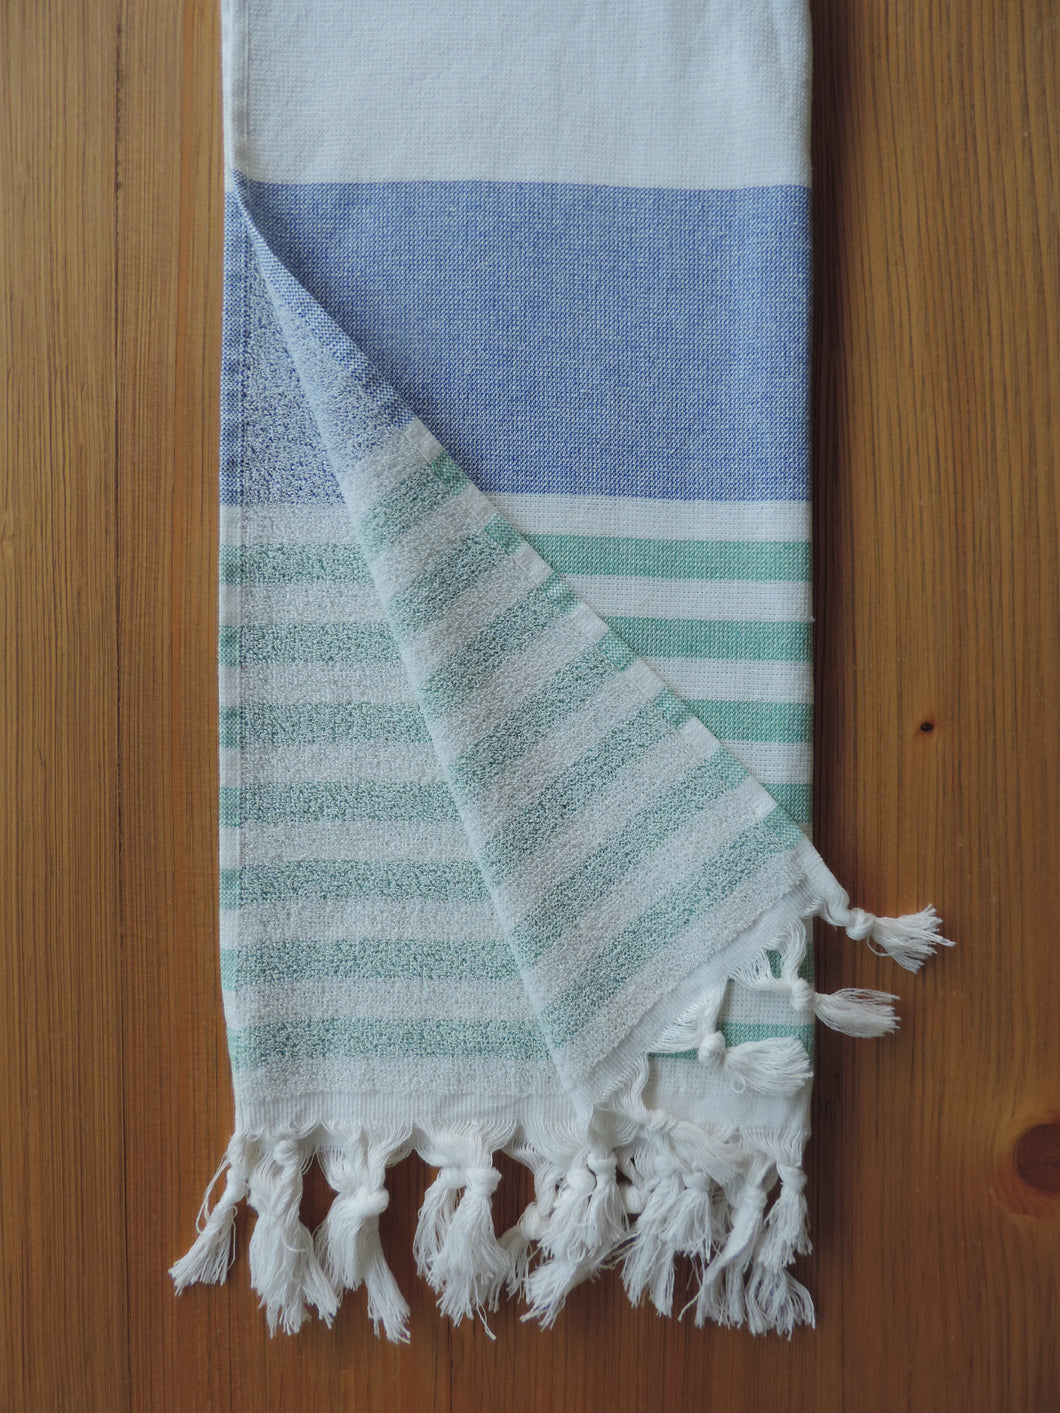 Personalized Beach Towel Navy Blue & Green stripes handmade in organic turkish cotton with terry lining